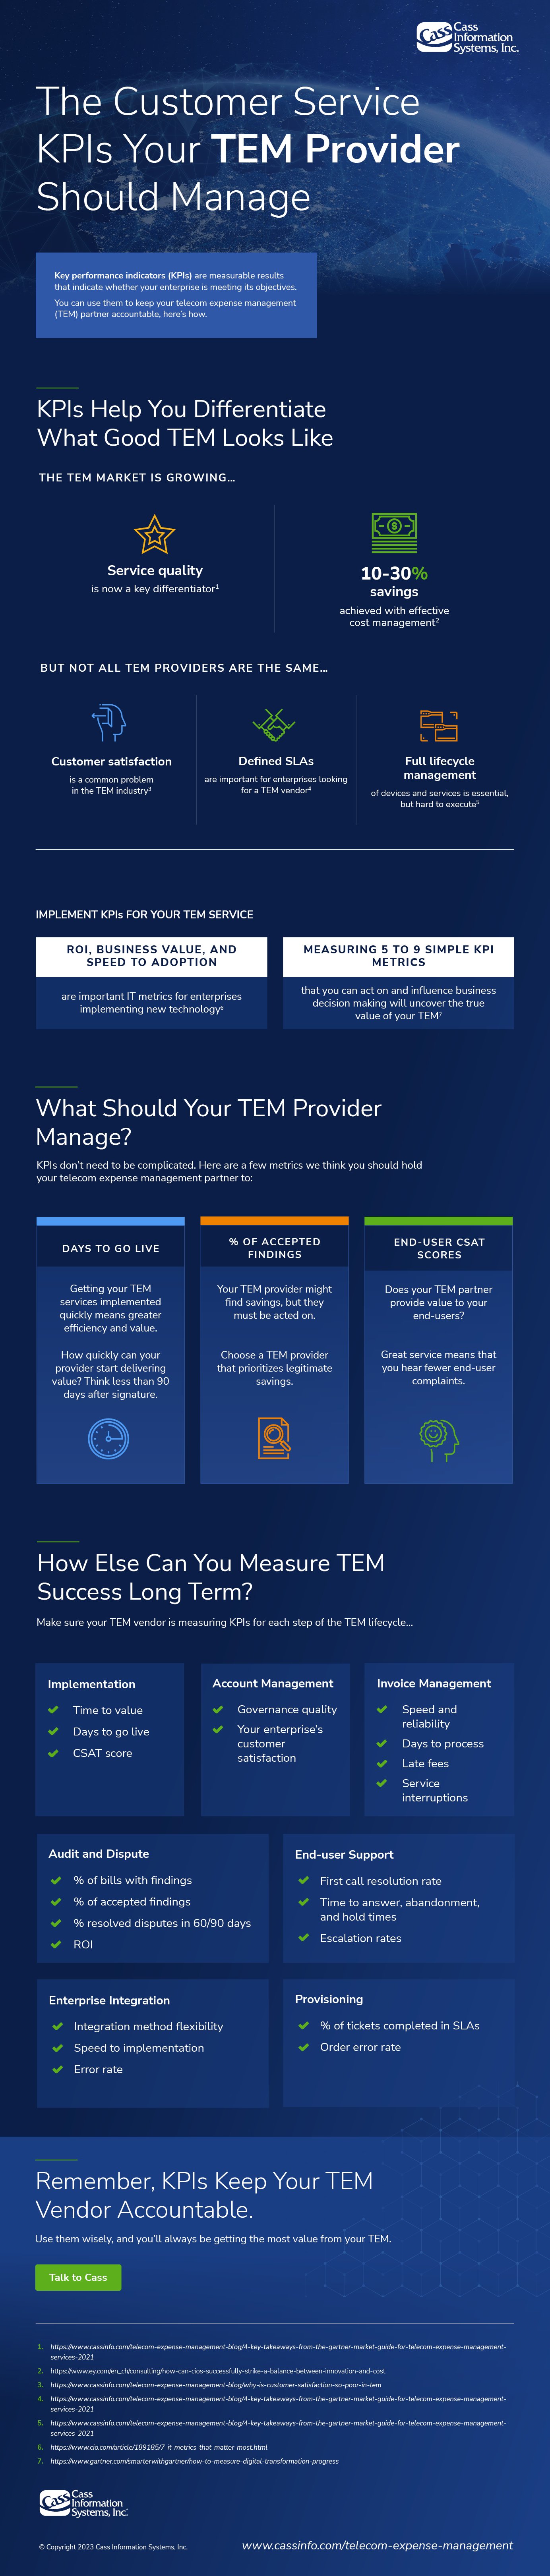 CST-1824_Customer_Service_KPIs_Your_TEM_Provider_Should_Manage_Infographic_-1